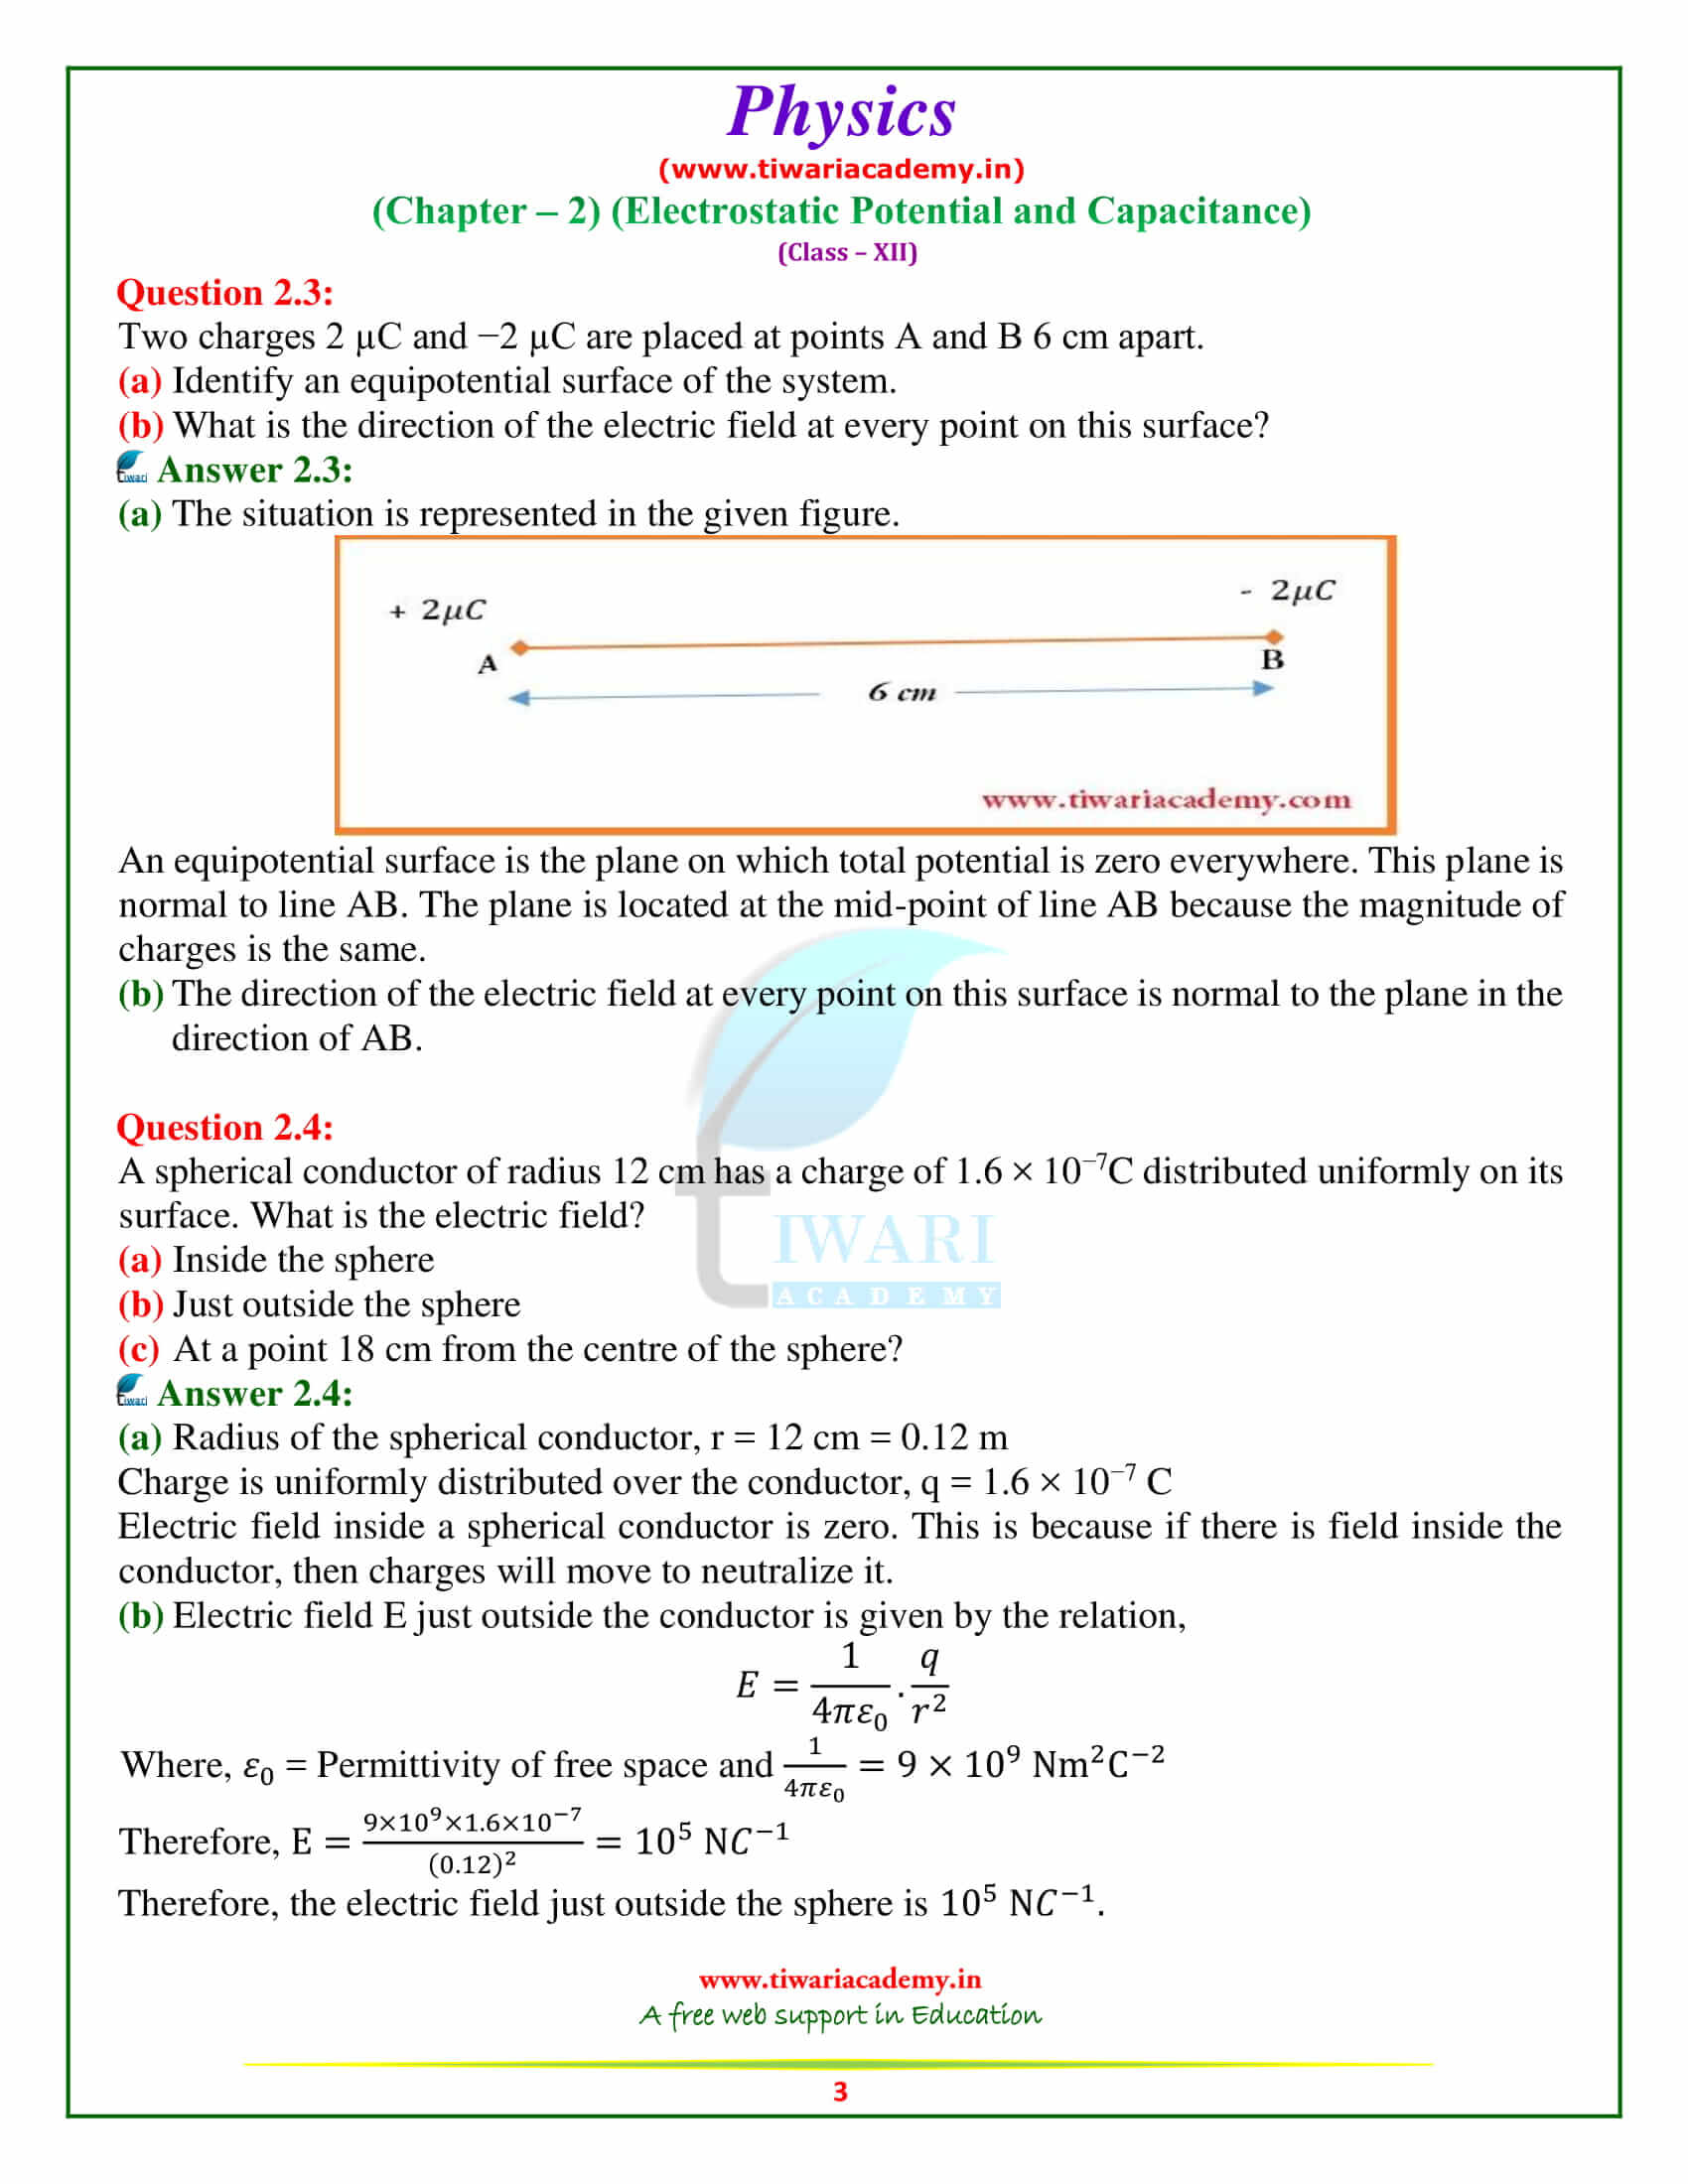 NCERT Solutions for Class 12 Physics Chapter 2 Electrostatic Potential and Capacitance free dowload in pdf